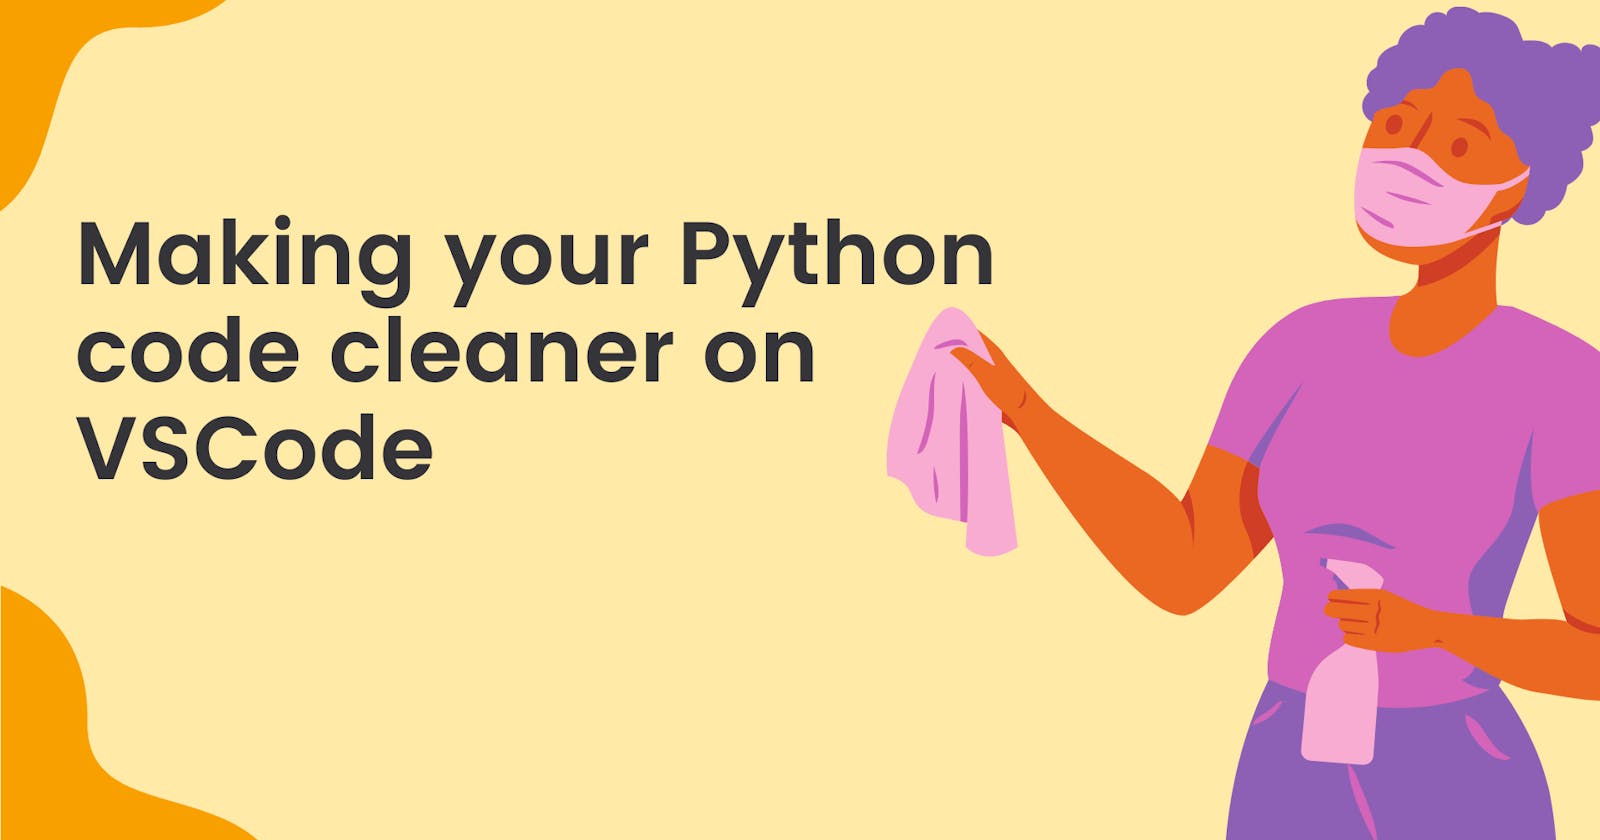 Making your Python code cleaner on VSCode